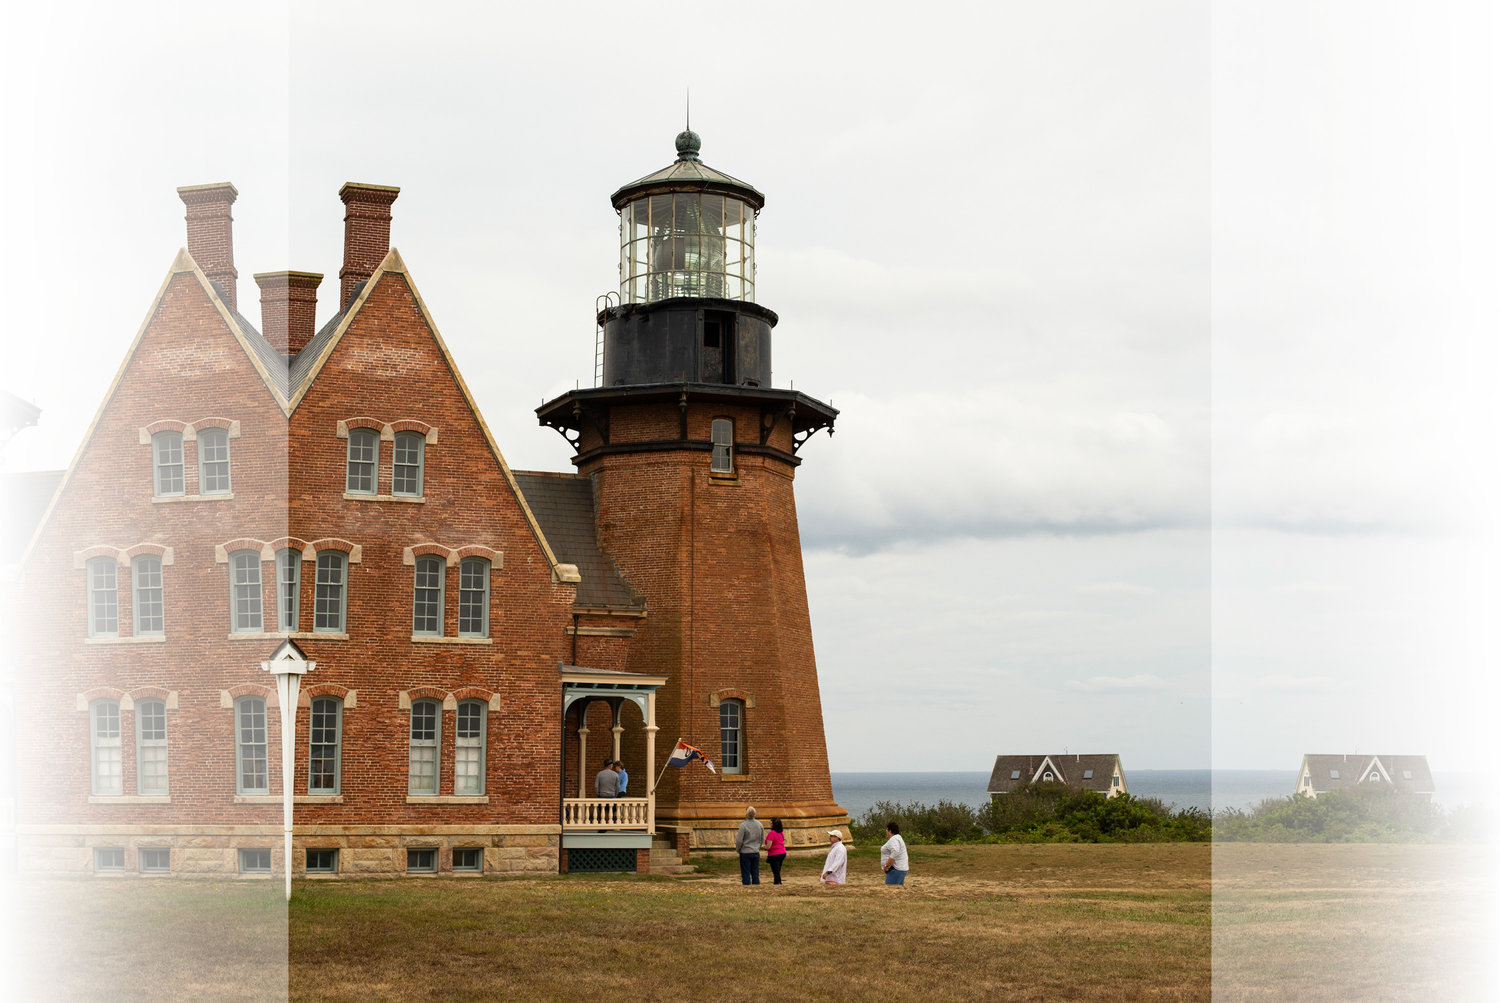 Don’t miss a visit to Block Island this summer